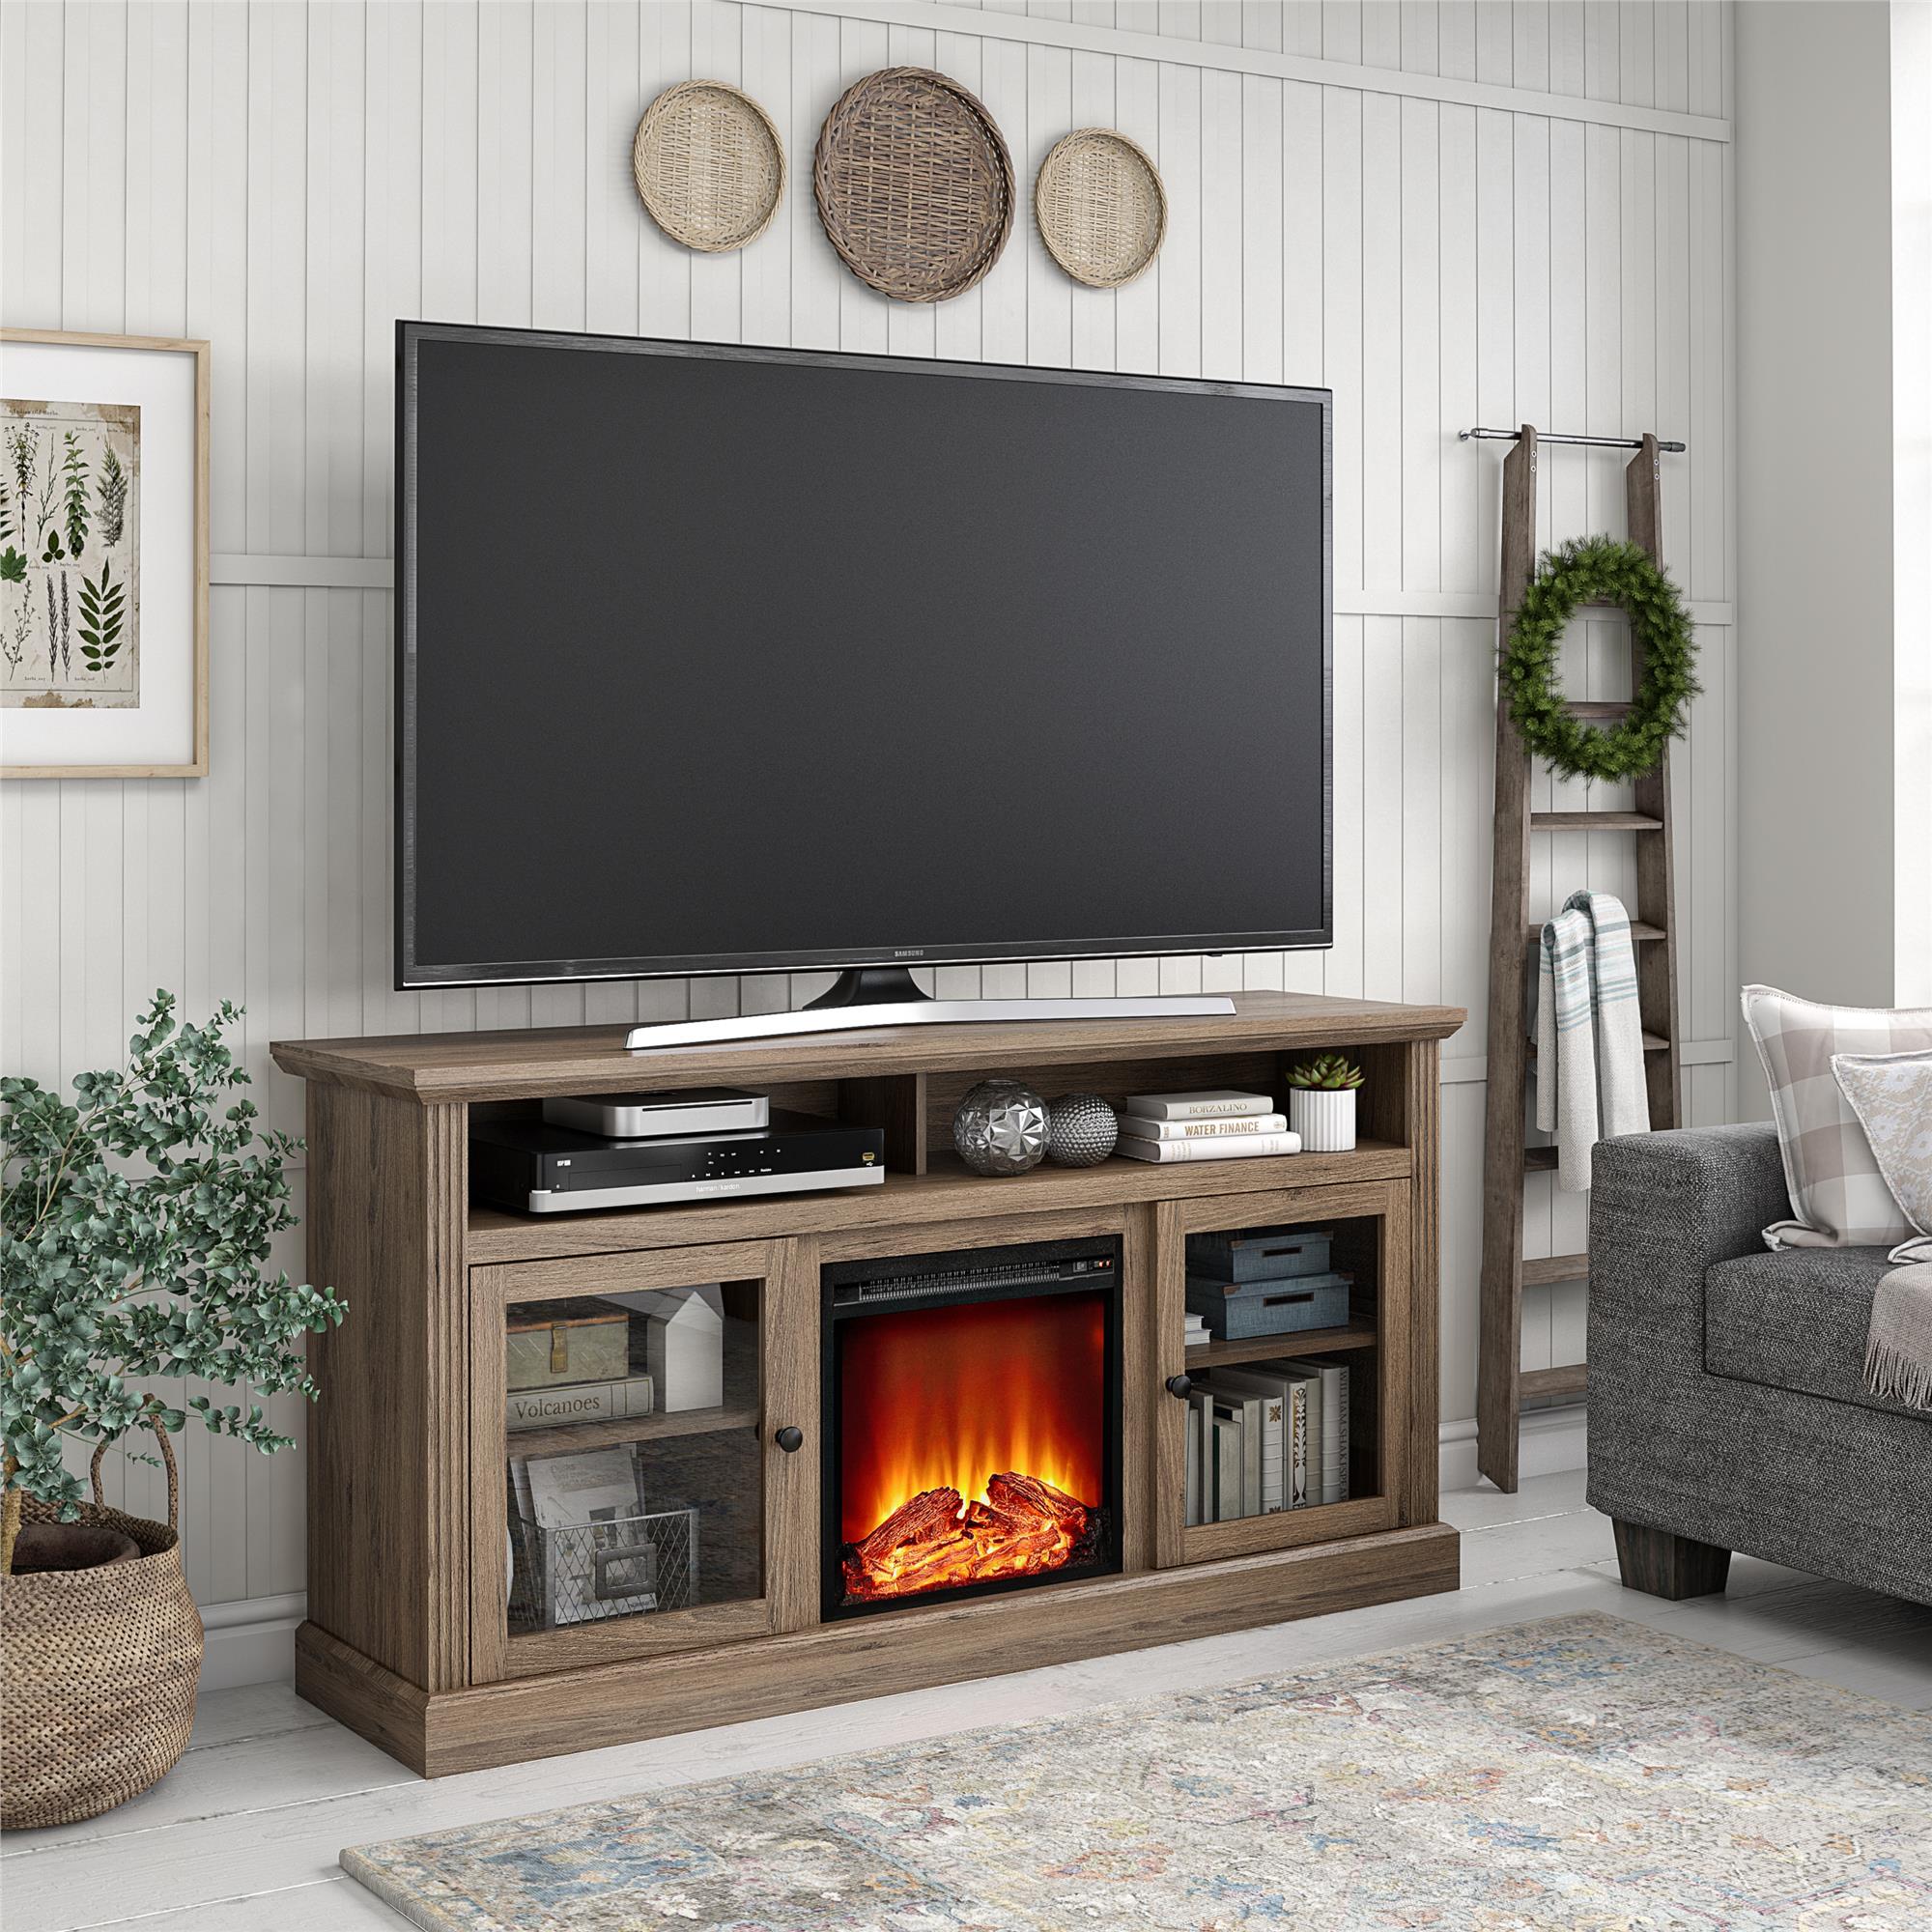 Ameriwood Home Leesburg Fireplace TV Stand for TVs up to 65", Rustic Oak - image 2 of 9